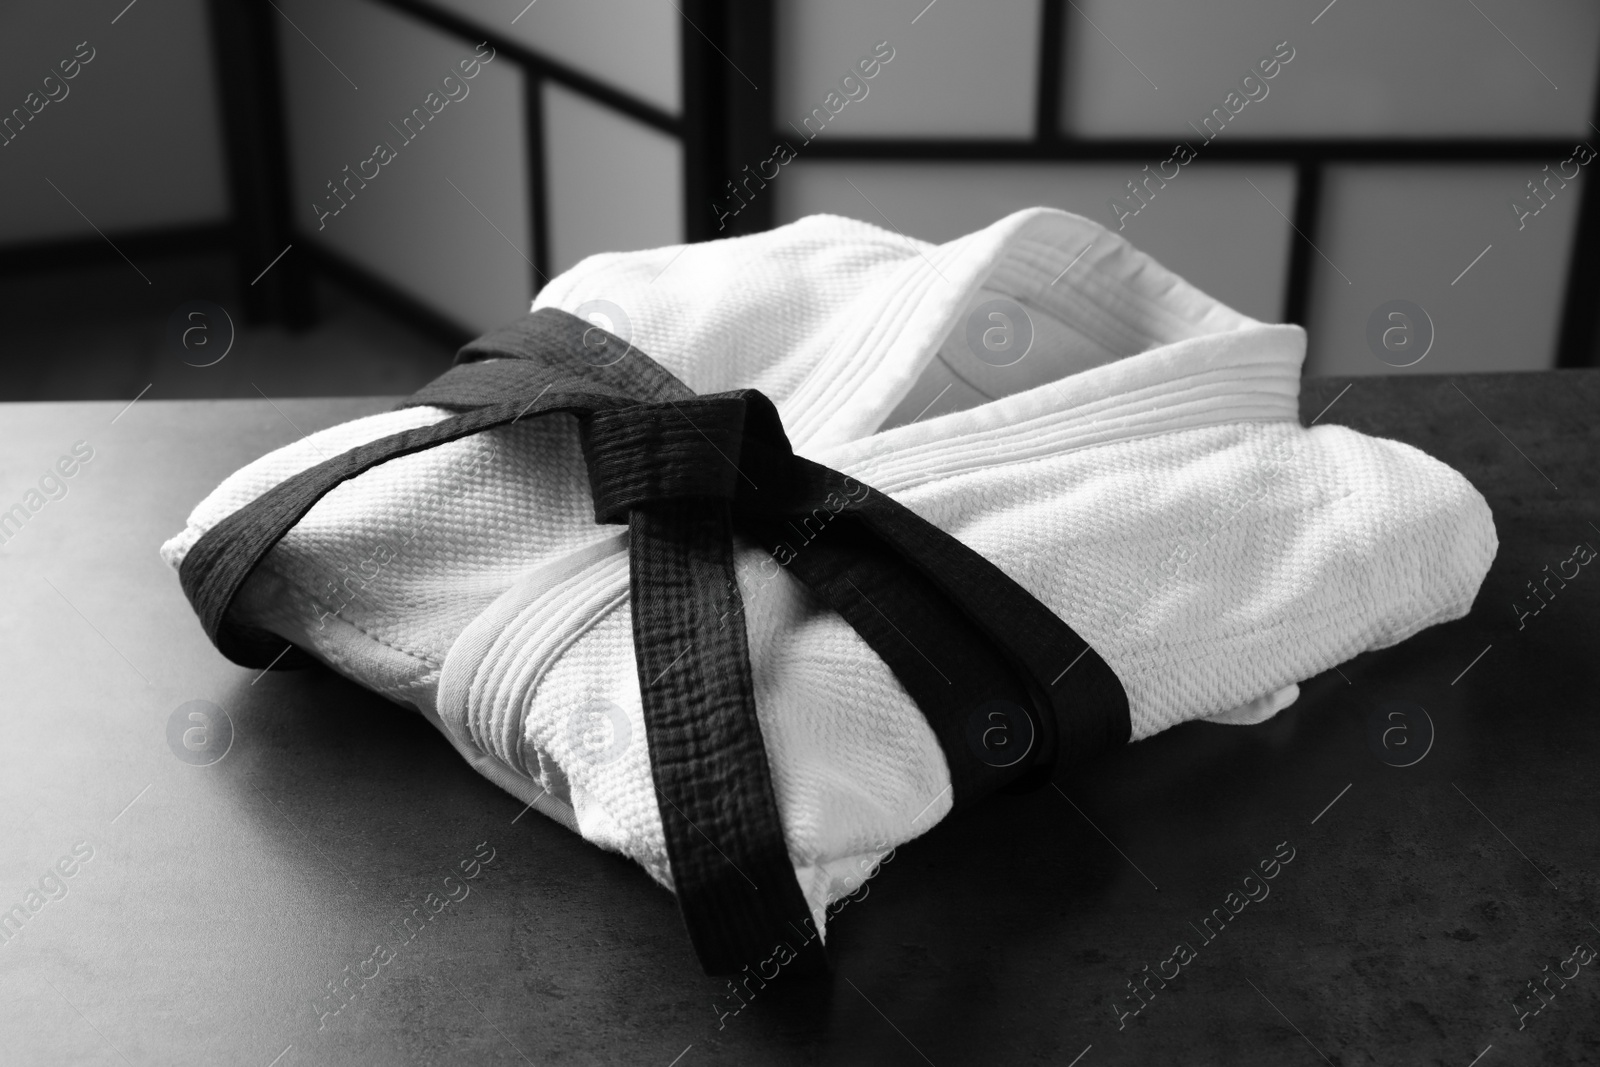 Photo of Martial arts uniform with black belt on grey stone table indoors